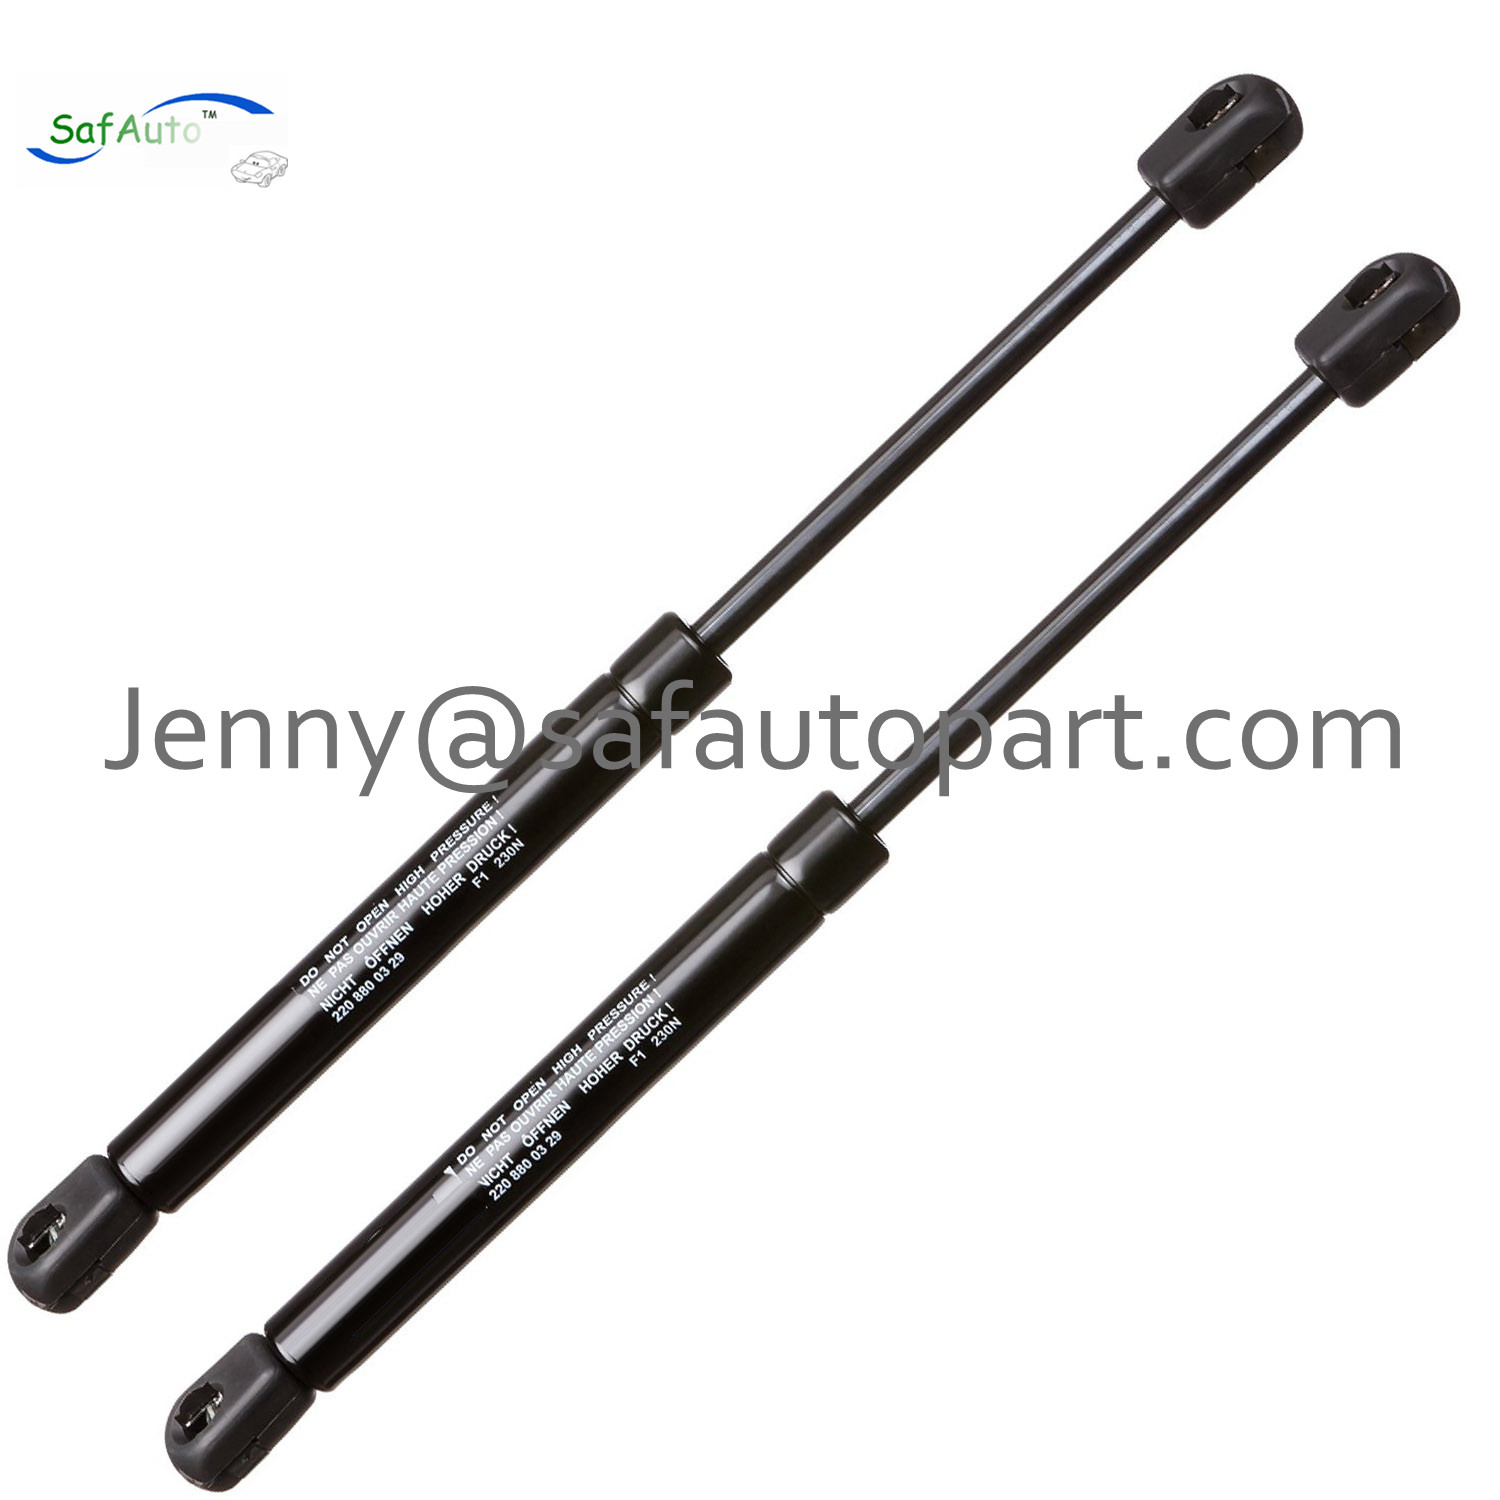 2 Front Hood Lift Support Mercedes-Benz S430 S500 S600 4MATIC S55 & S65 AMG Support Damper Shock Strut 2208800329